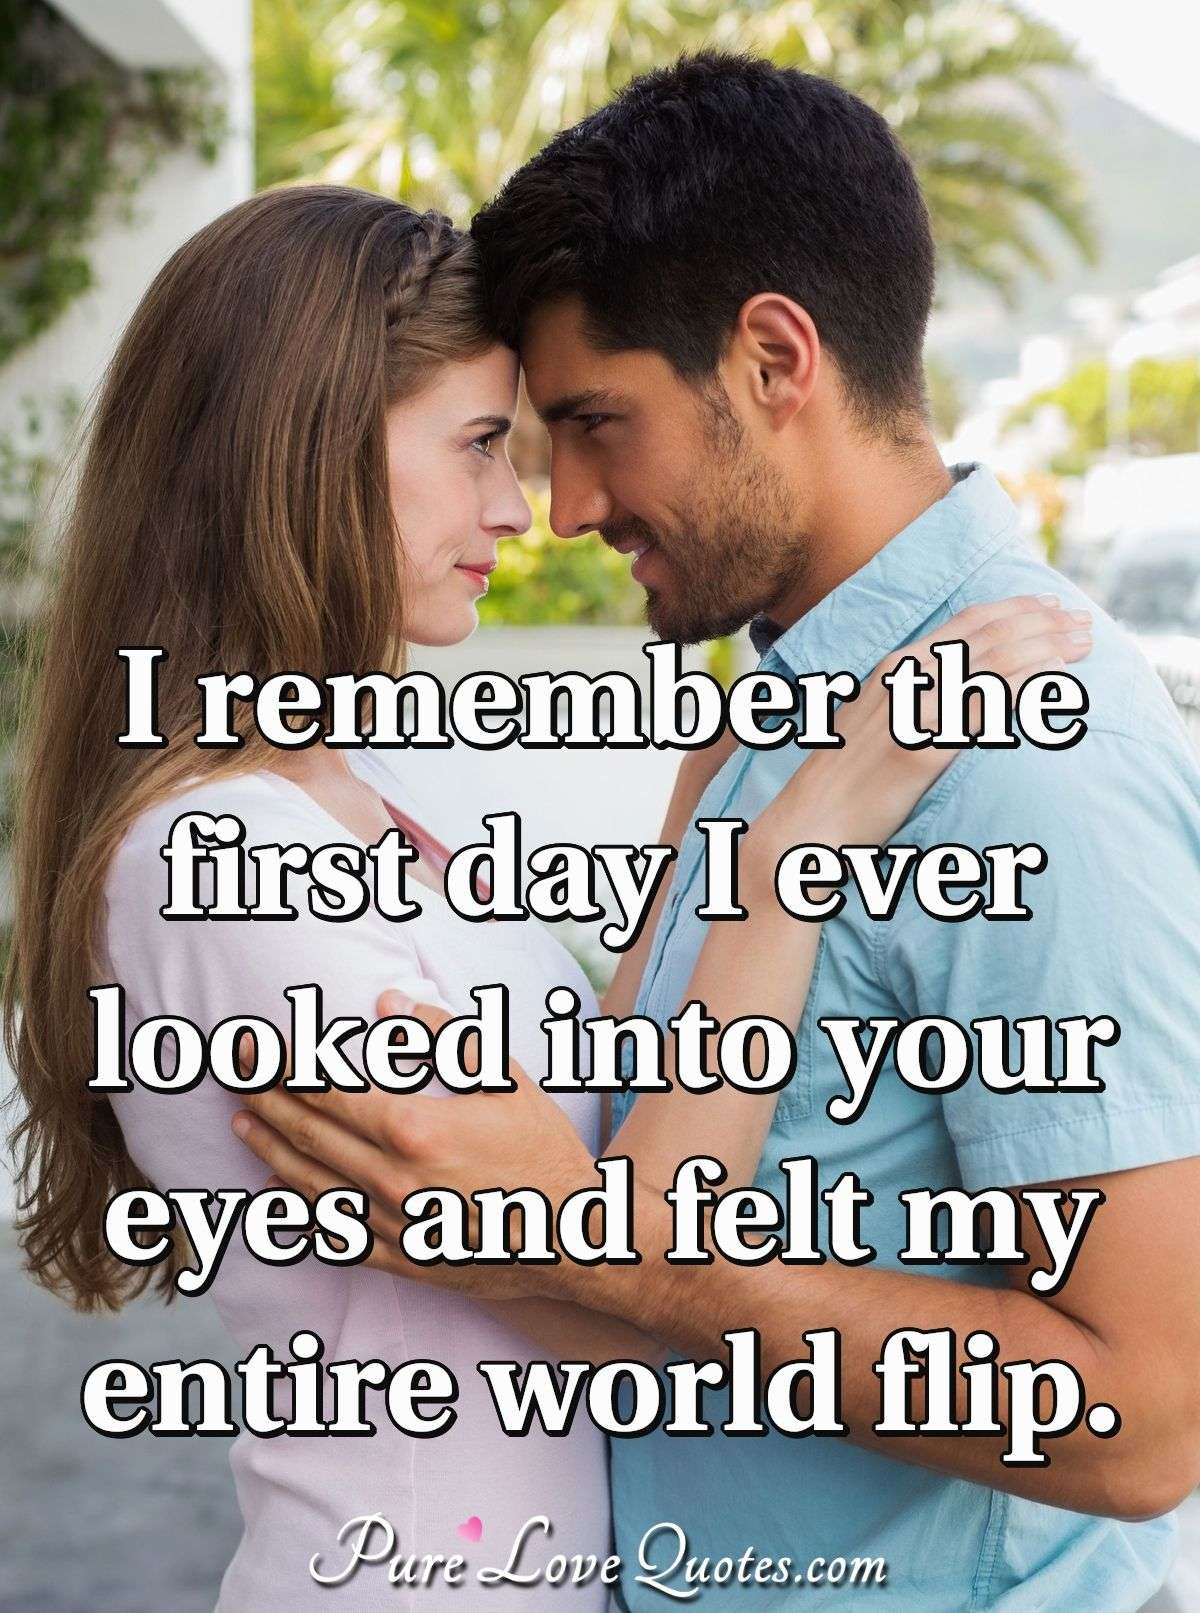 I remember the first day I ever looked into your eyes and felt my entire world flip. - Anonymous